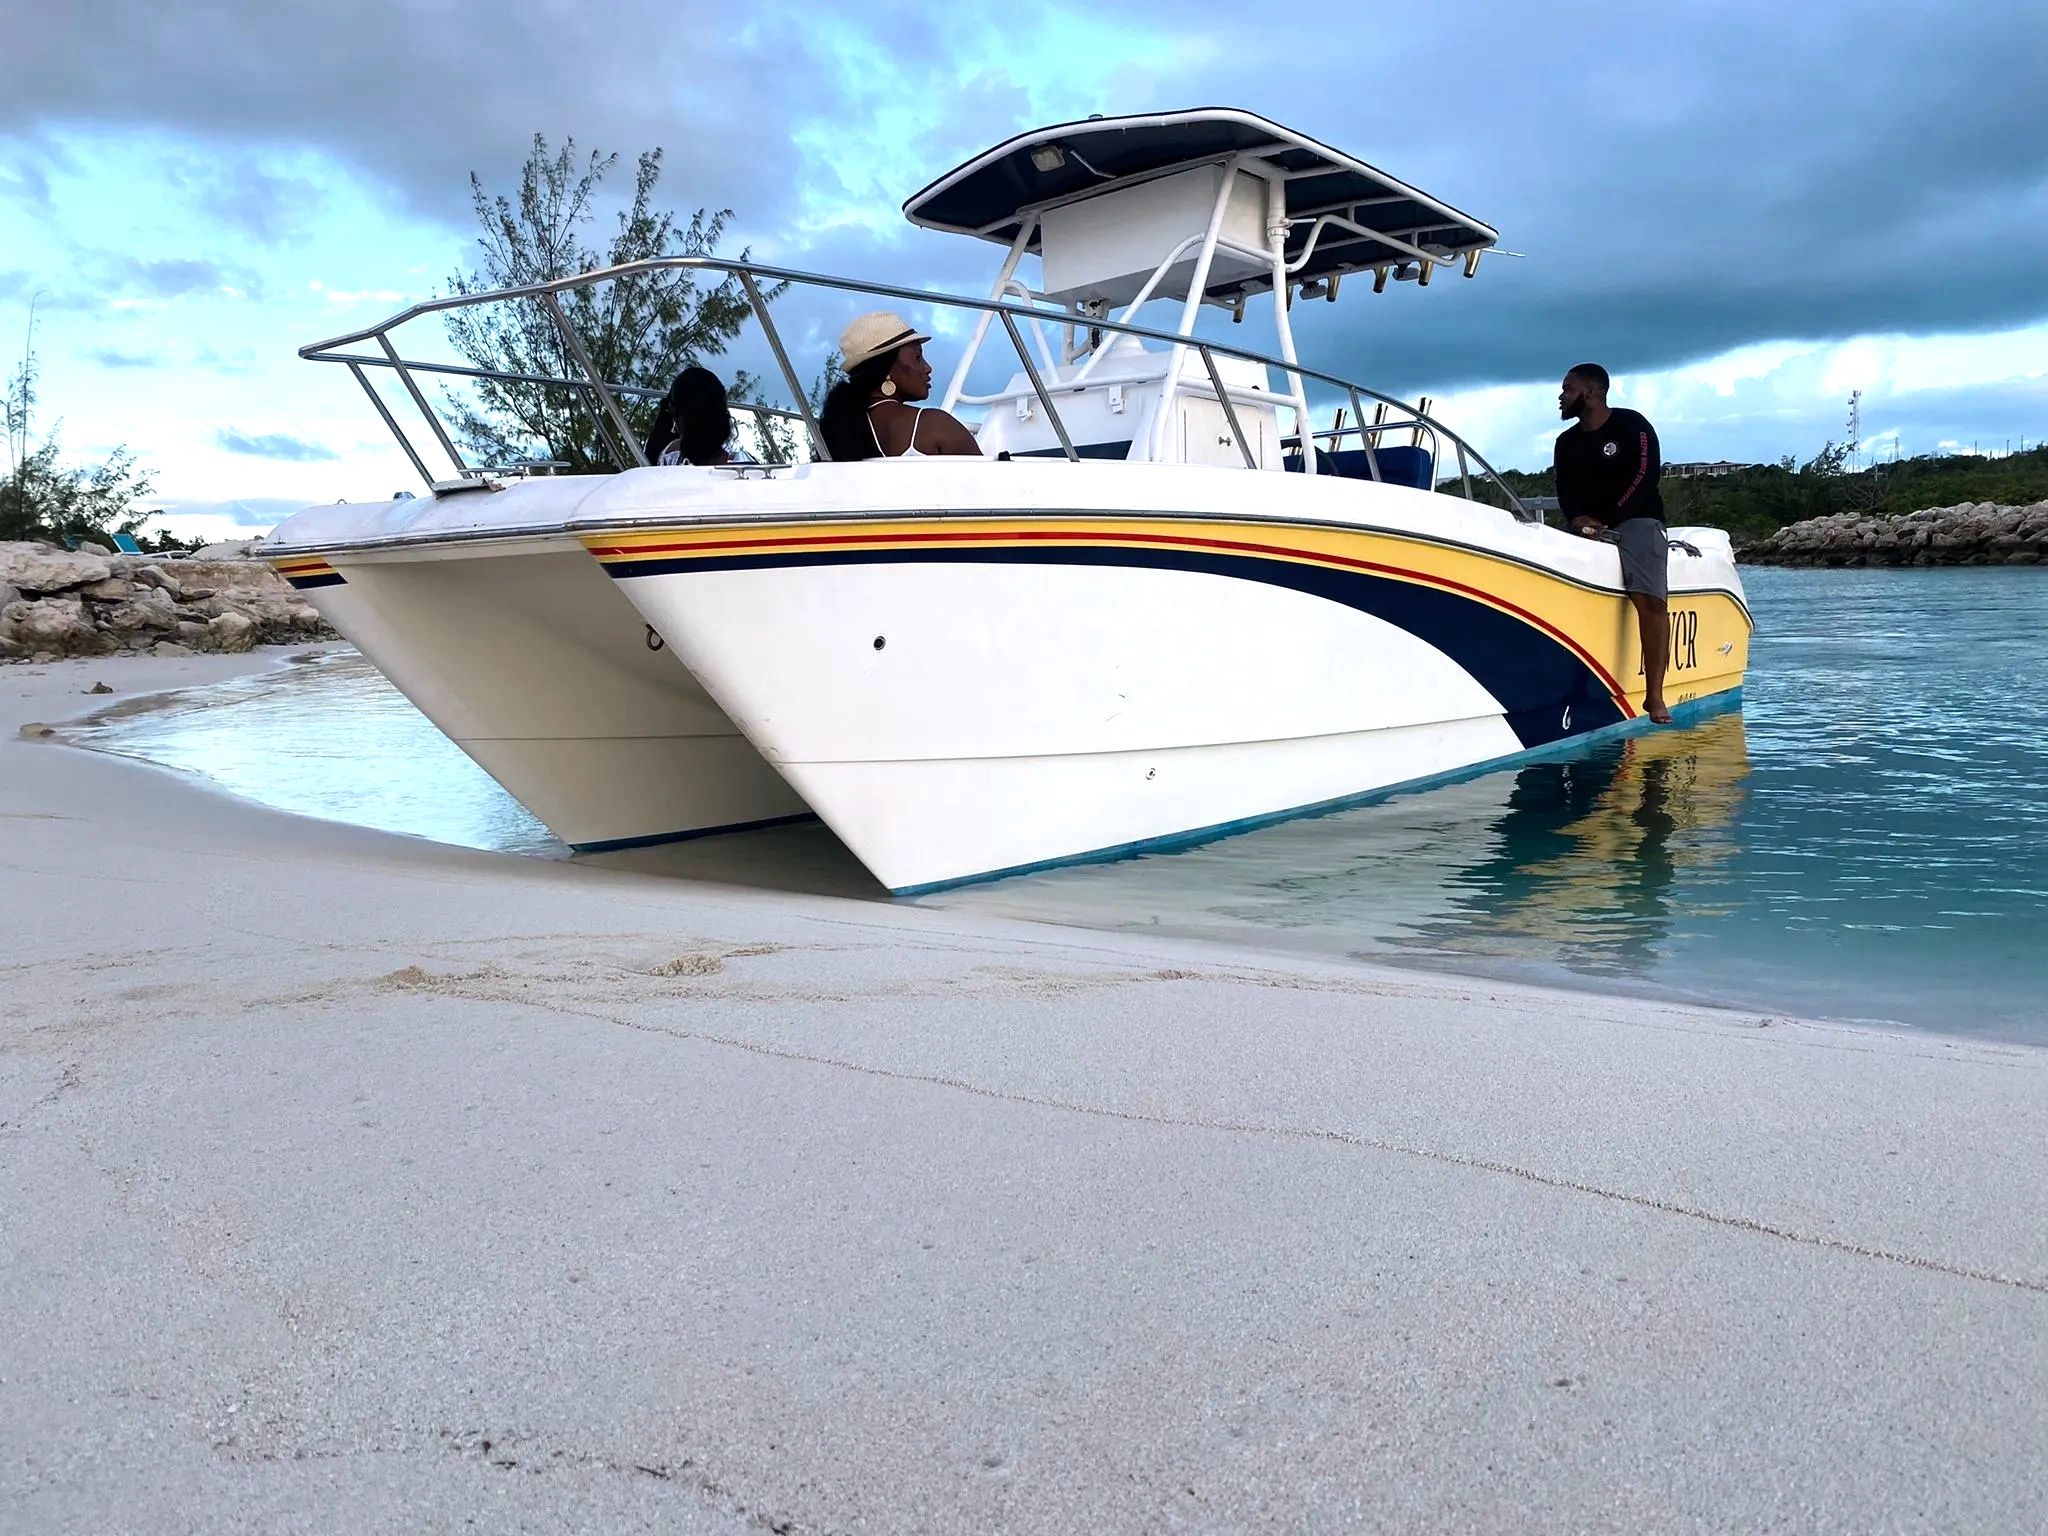 Boat Charters - Providenciales Excursion